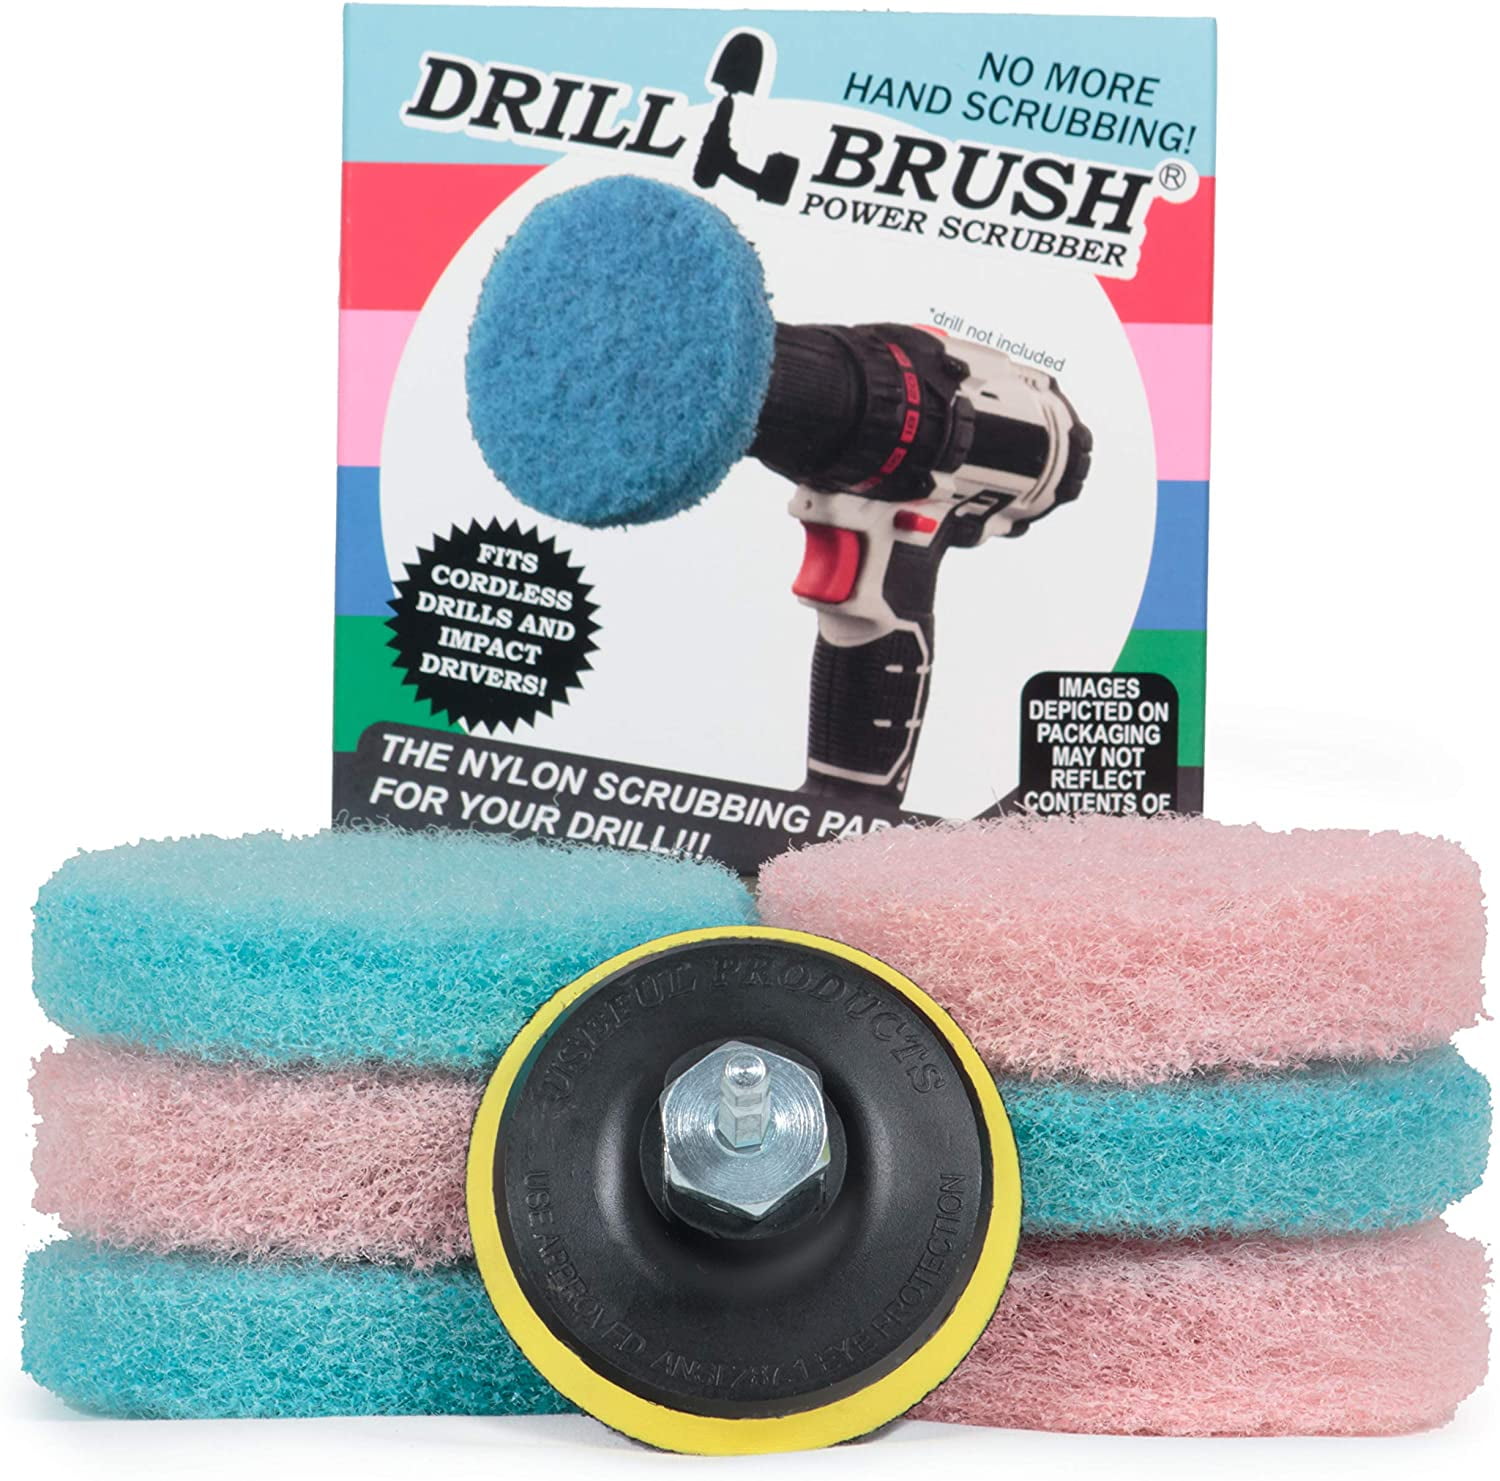 Drill Brush Power Scrubber Scumbusting Scrub Pad Bathroom Tile Cleaning Kits 6